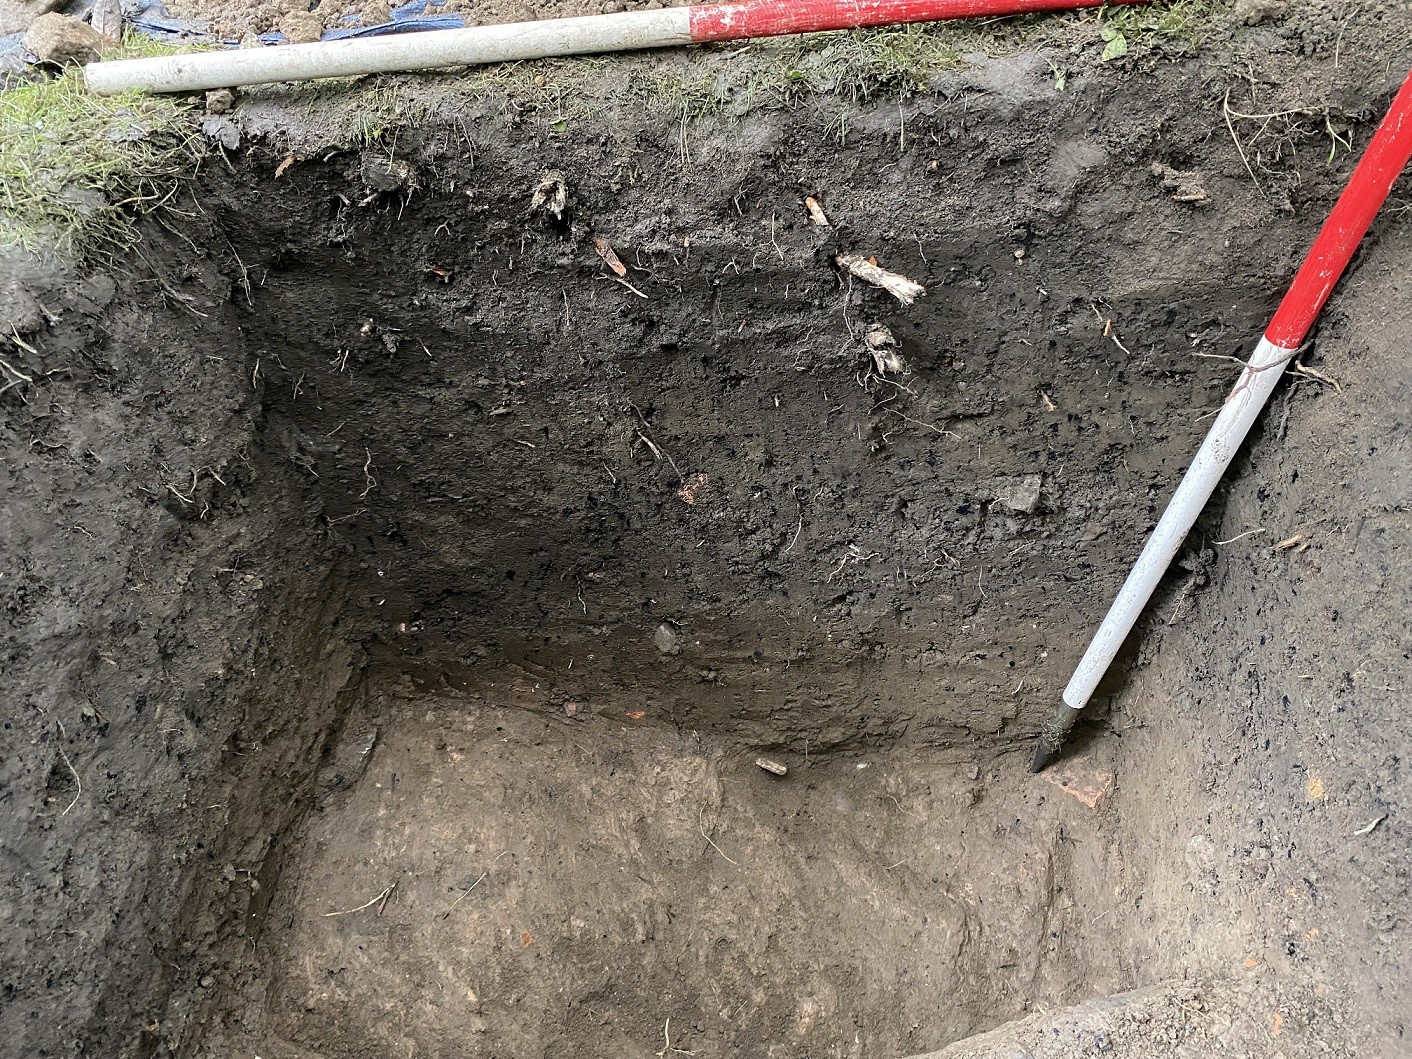 The road was uncovered during a dig in a garden.